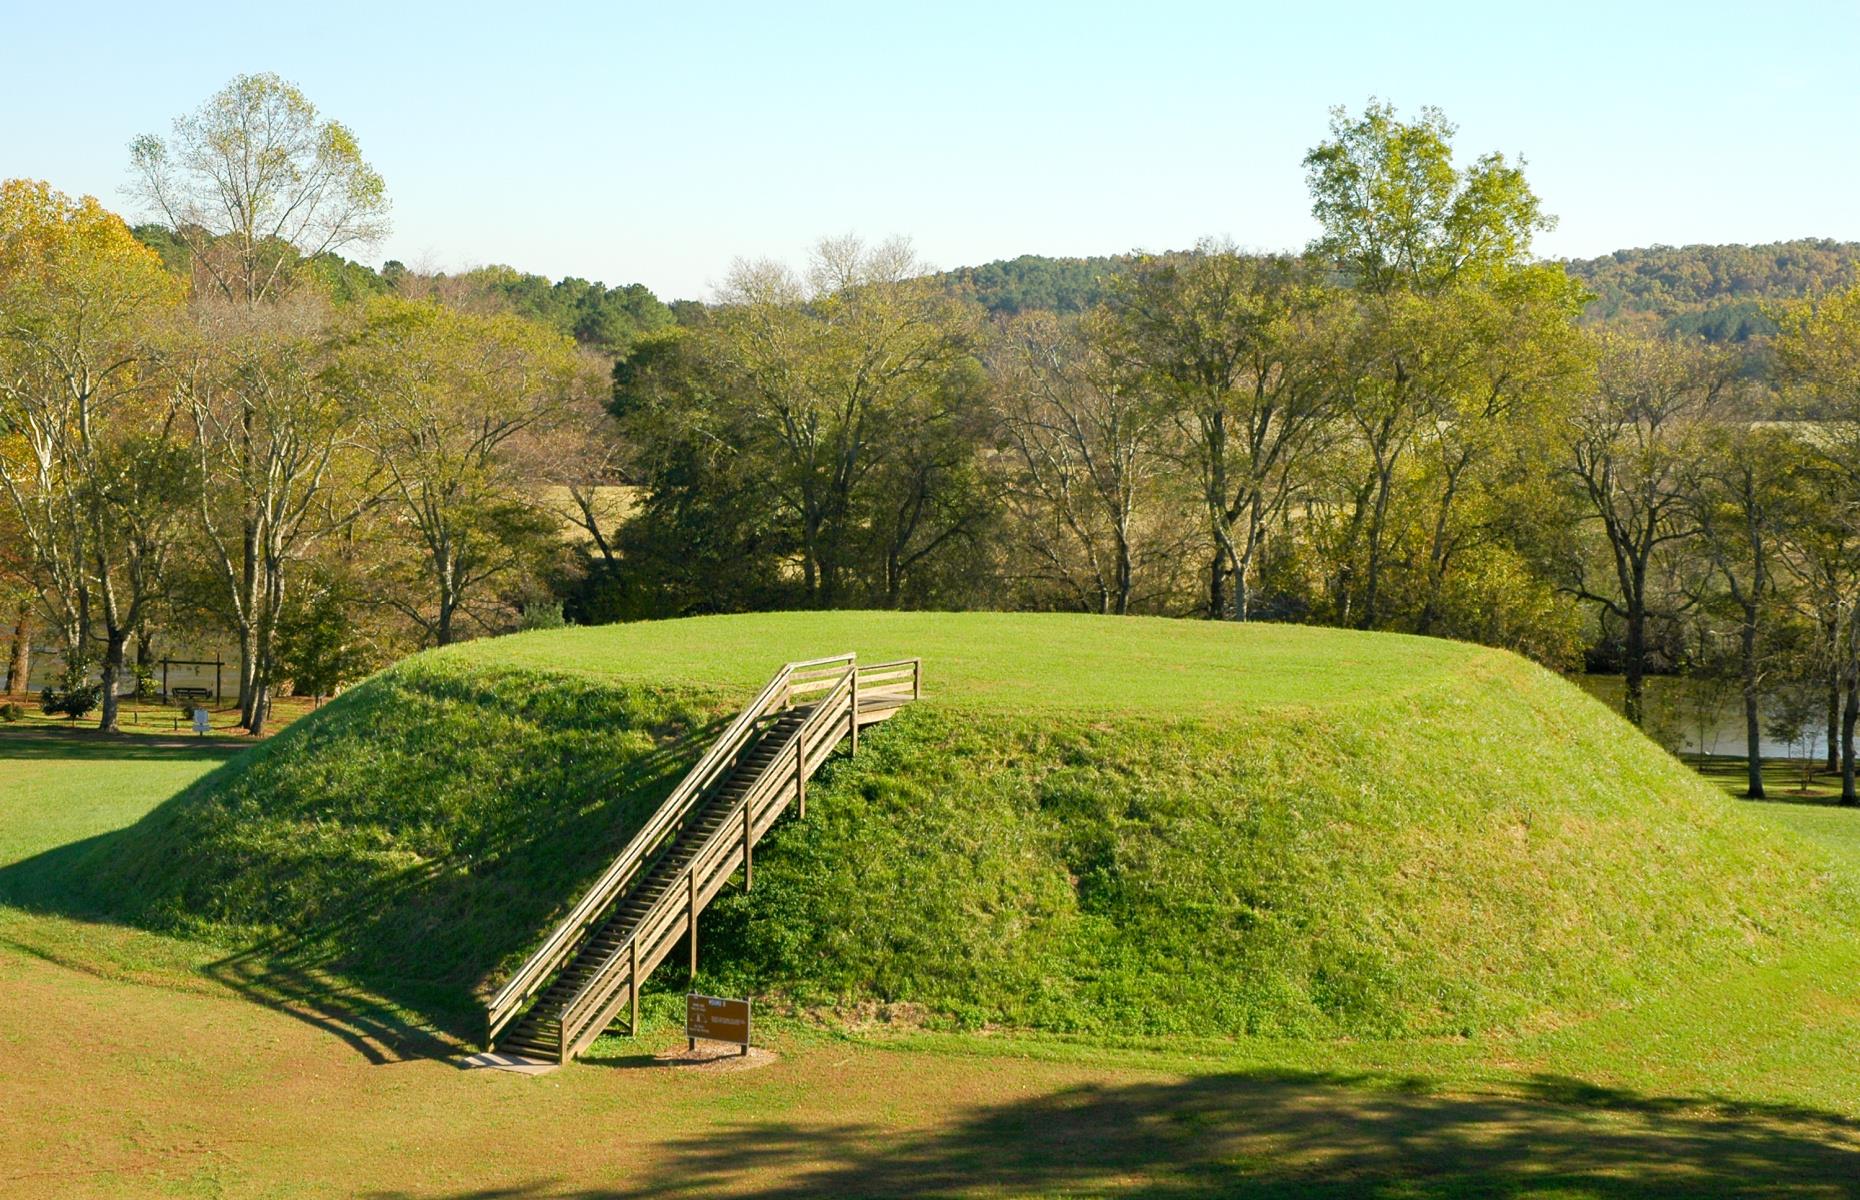 <p>Considered a sacred place by both the Cherokee and Muscogee Creek peoples, this <a href="https://gastateparks.org/EtowahIndianMounds">archeological site</a> features several tall mounds and a village site thought to have been home to thousands from around AD 1000 to 1550. The site is full of precious artifacts, many of which visitors can see in the onsite museum. The park also features a nature trail and interpretive signage.</p>